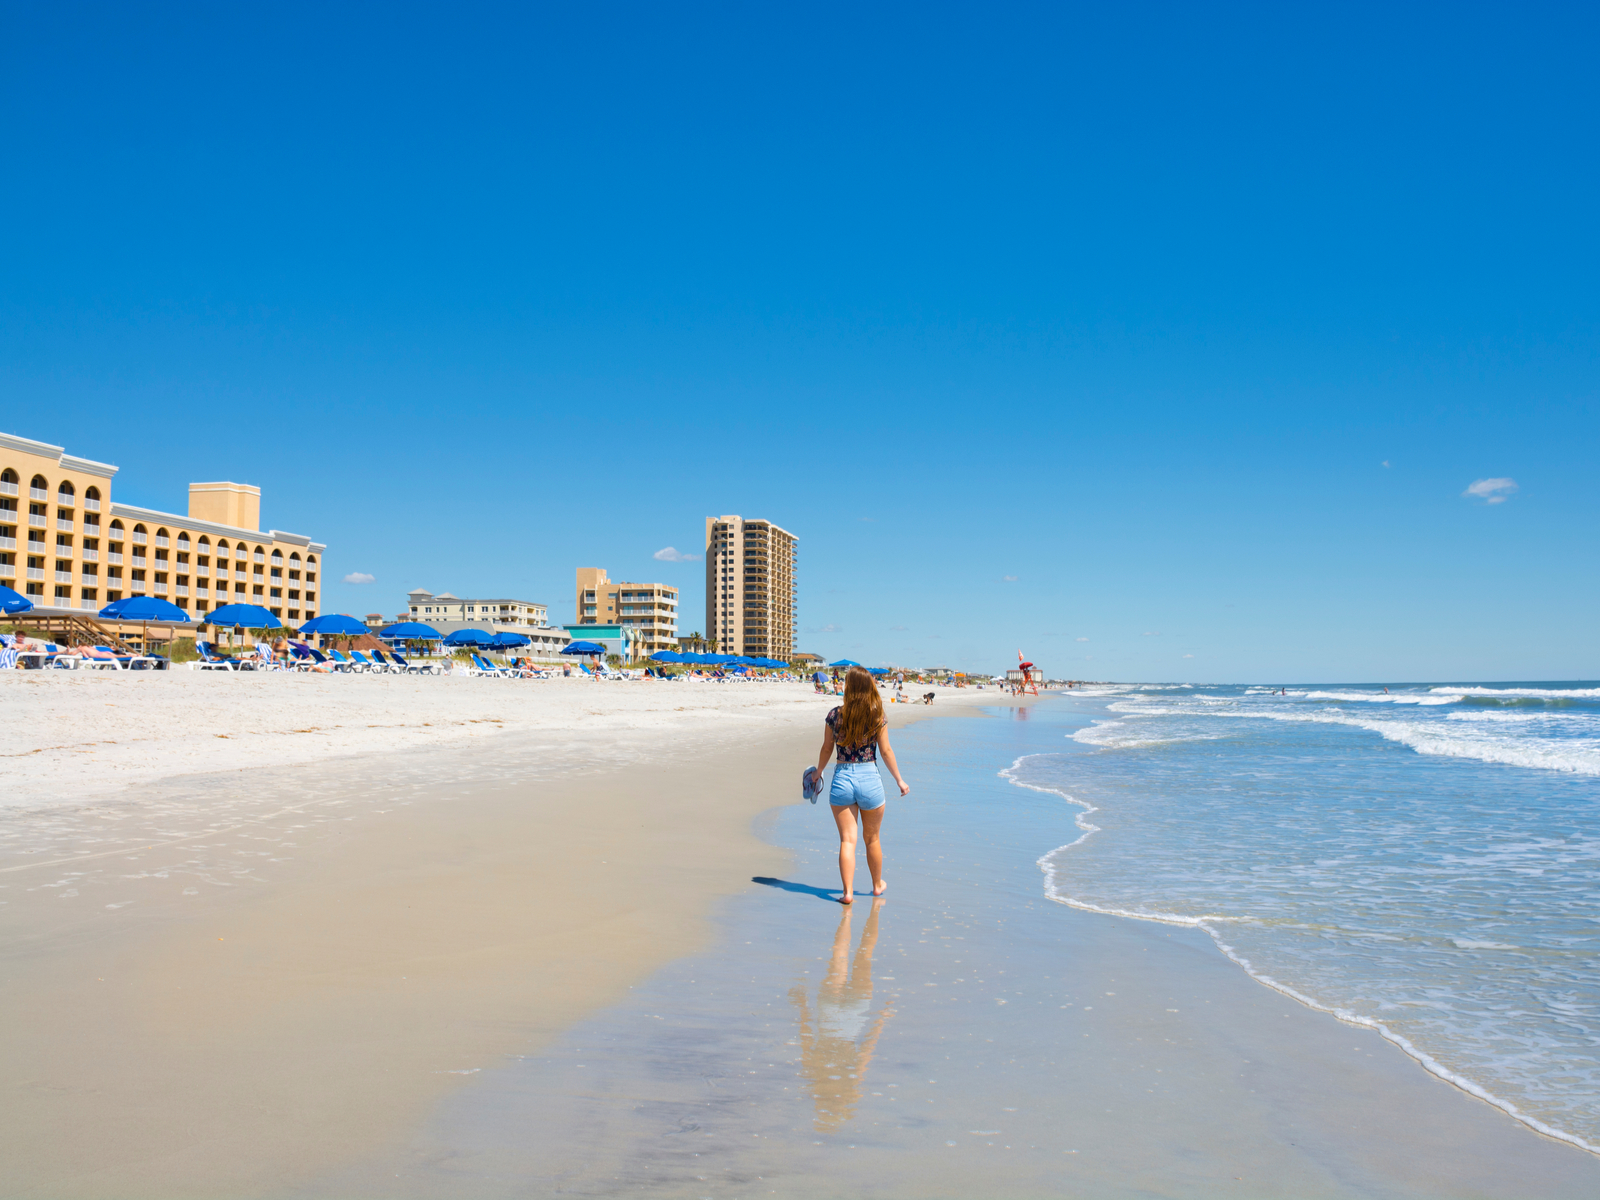 Girl walking on a beach in Jacksonville Florida on a sunny day